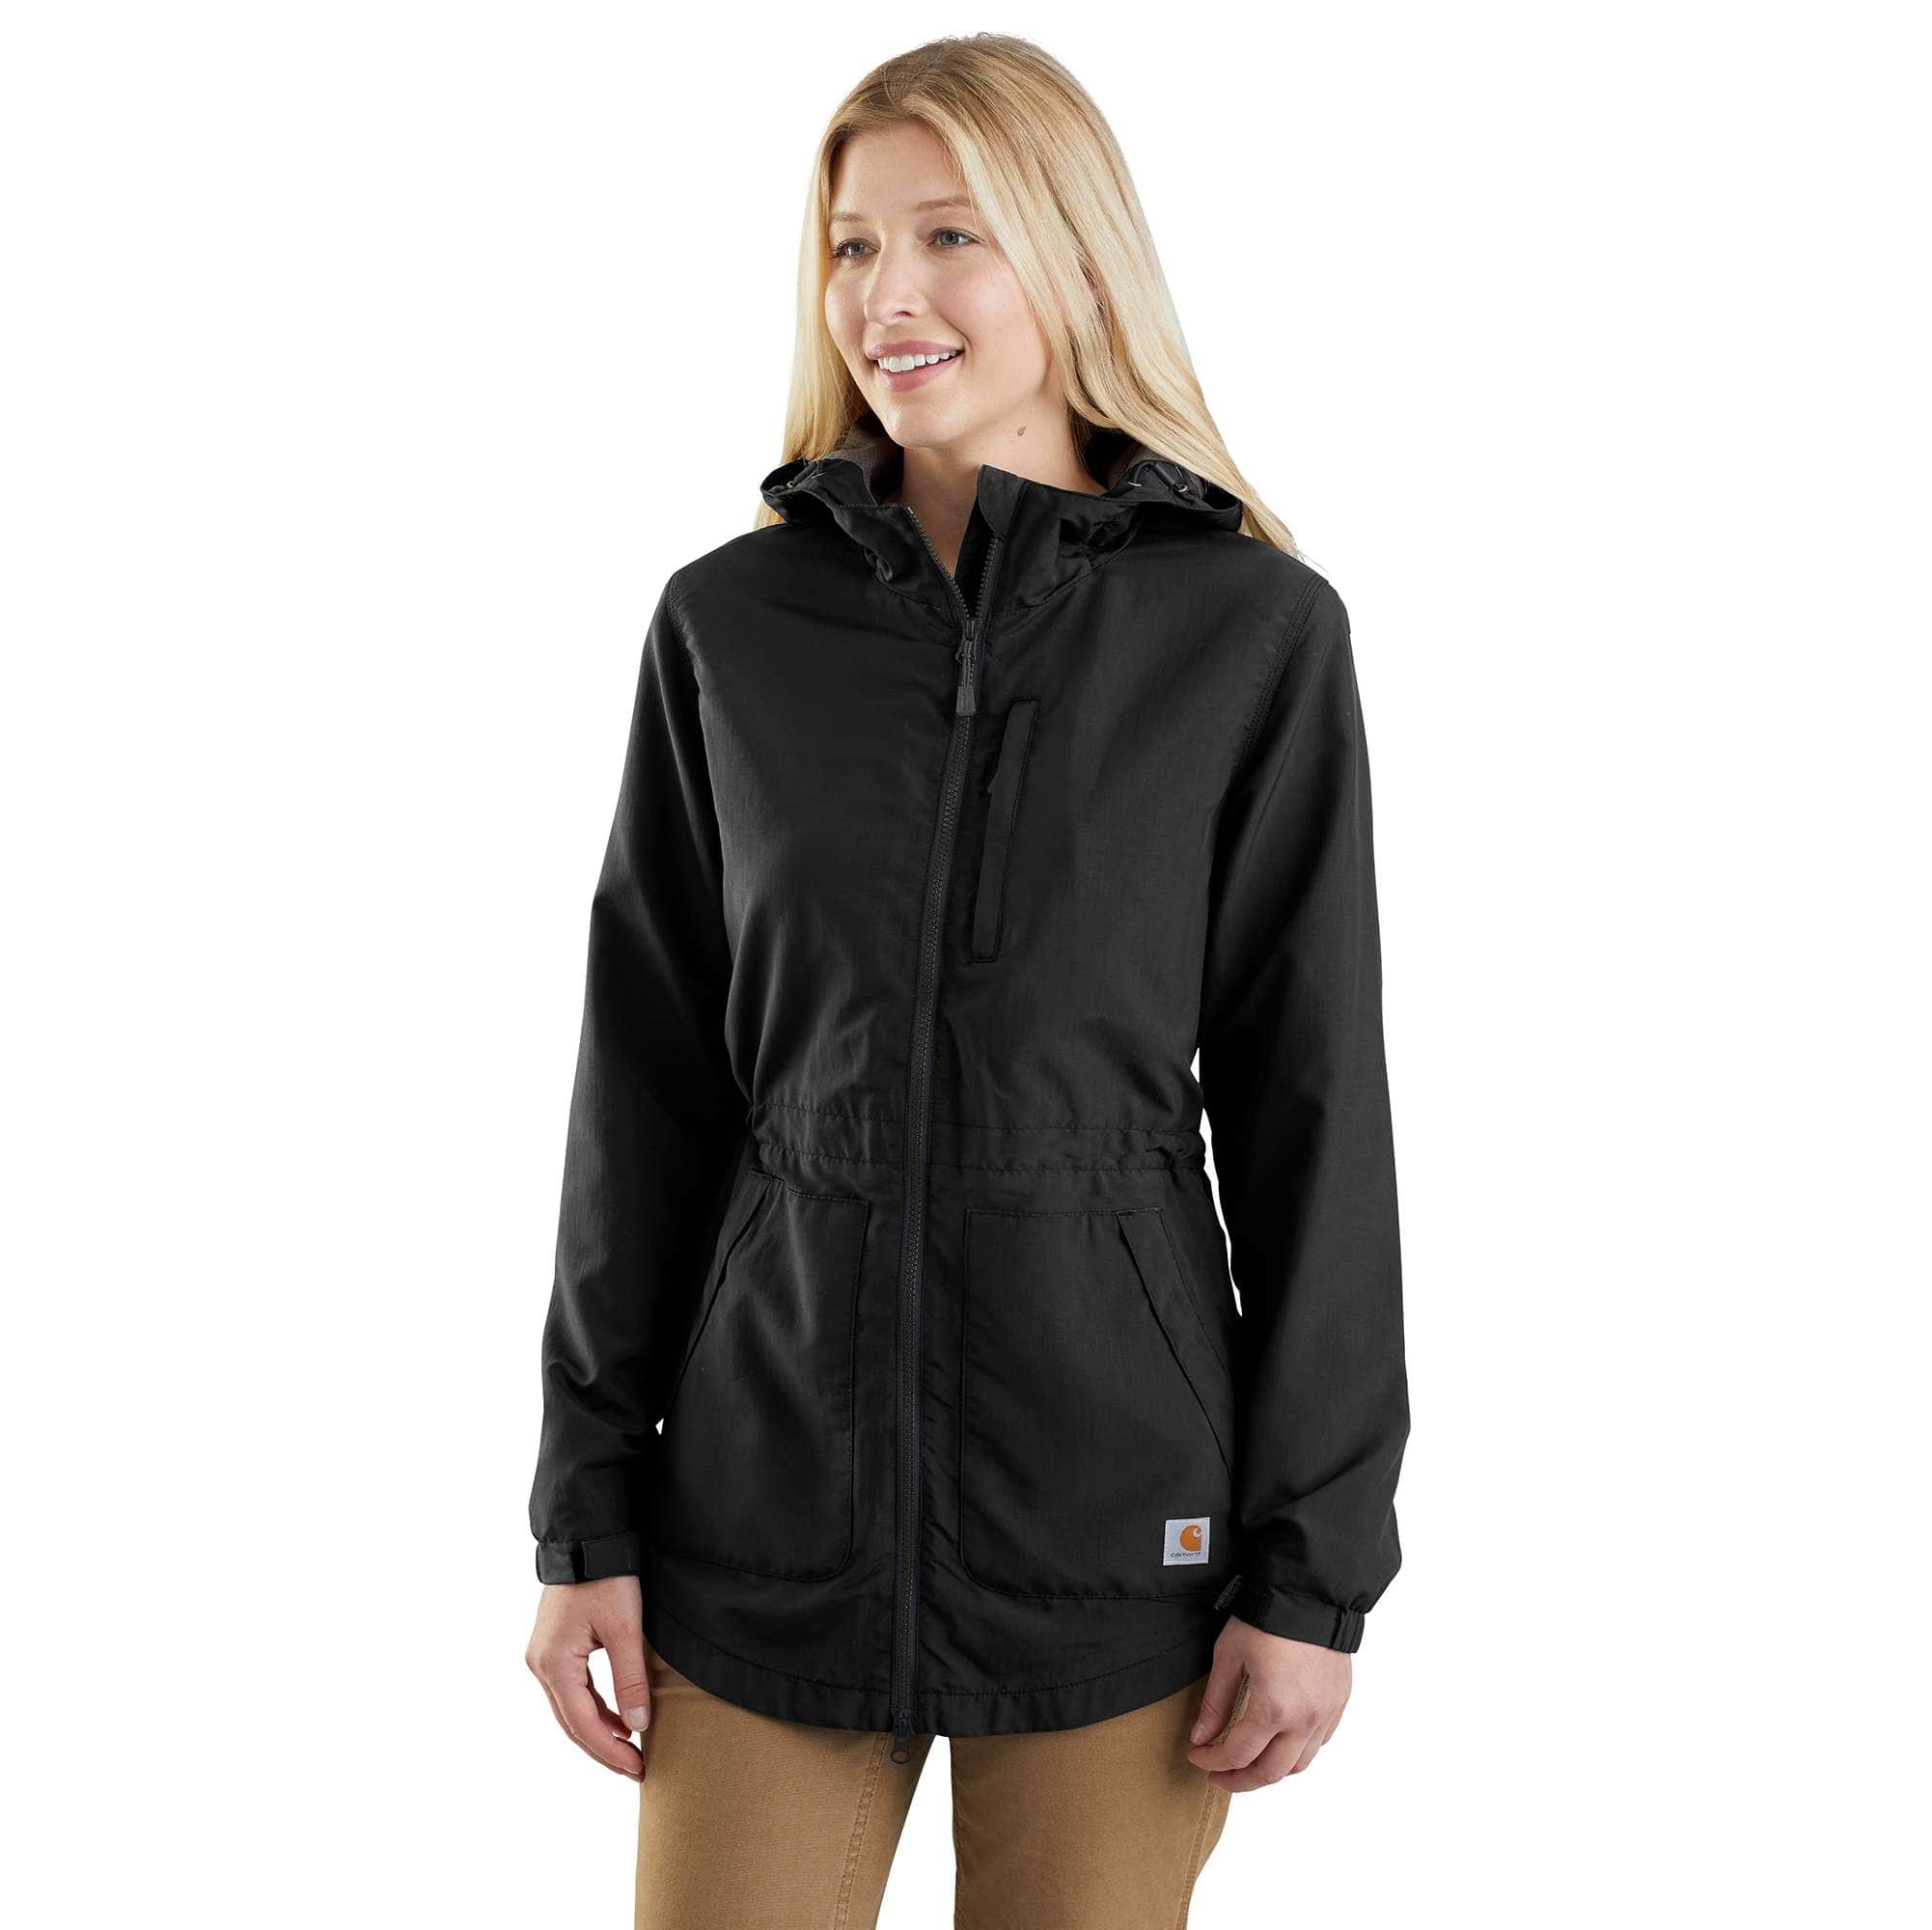 Women's Rain Jacket - Relaxed Fit Lightweight 1 Warm Rating